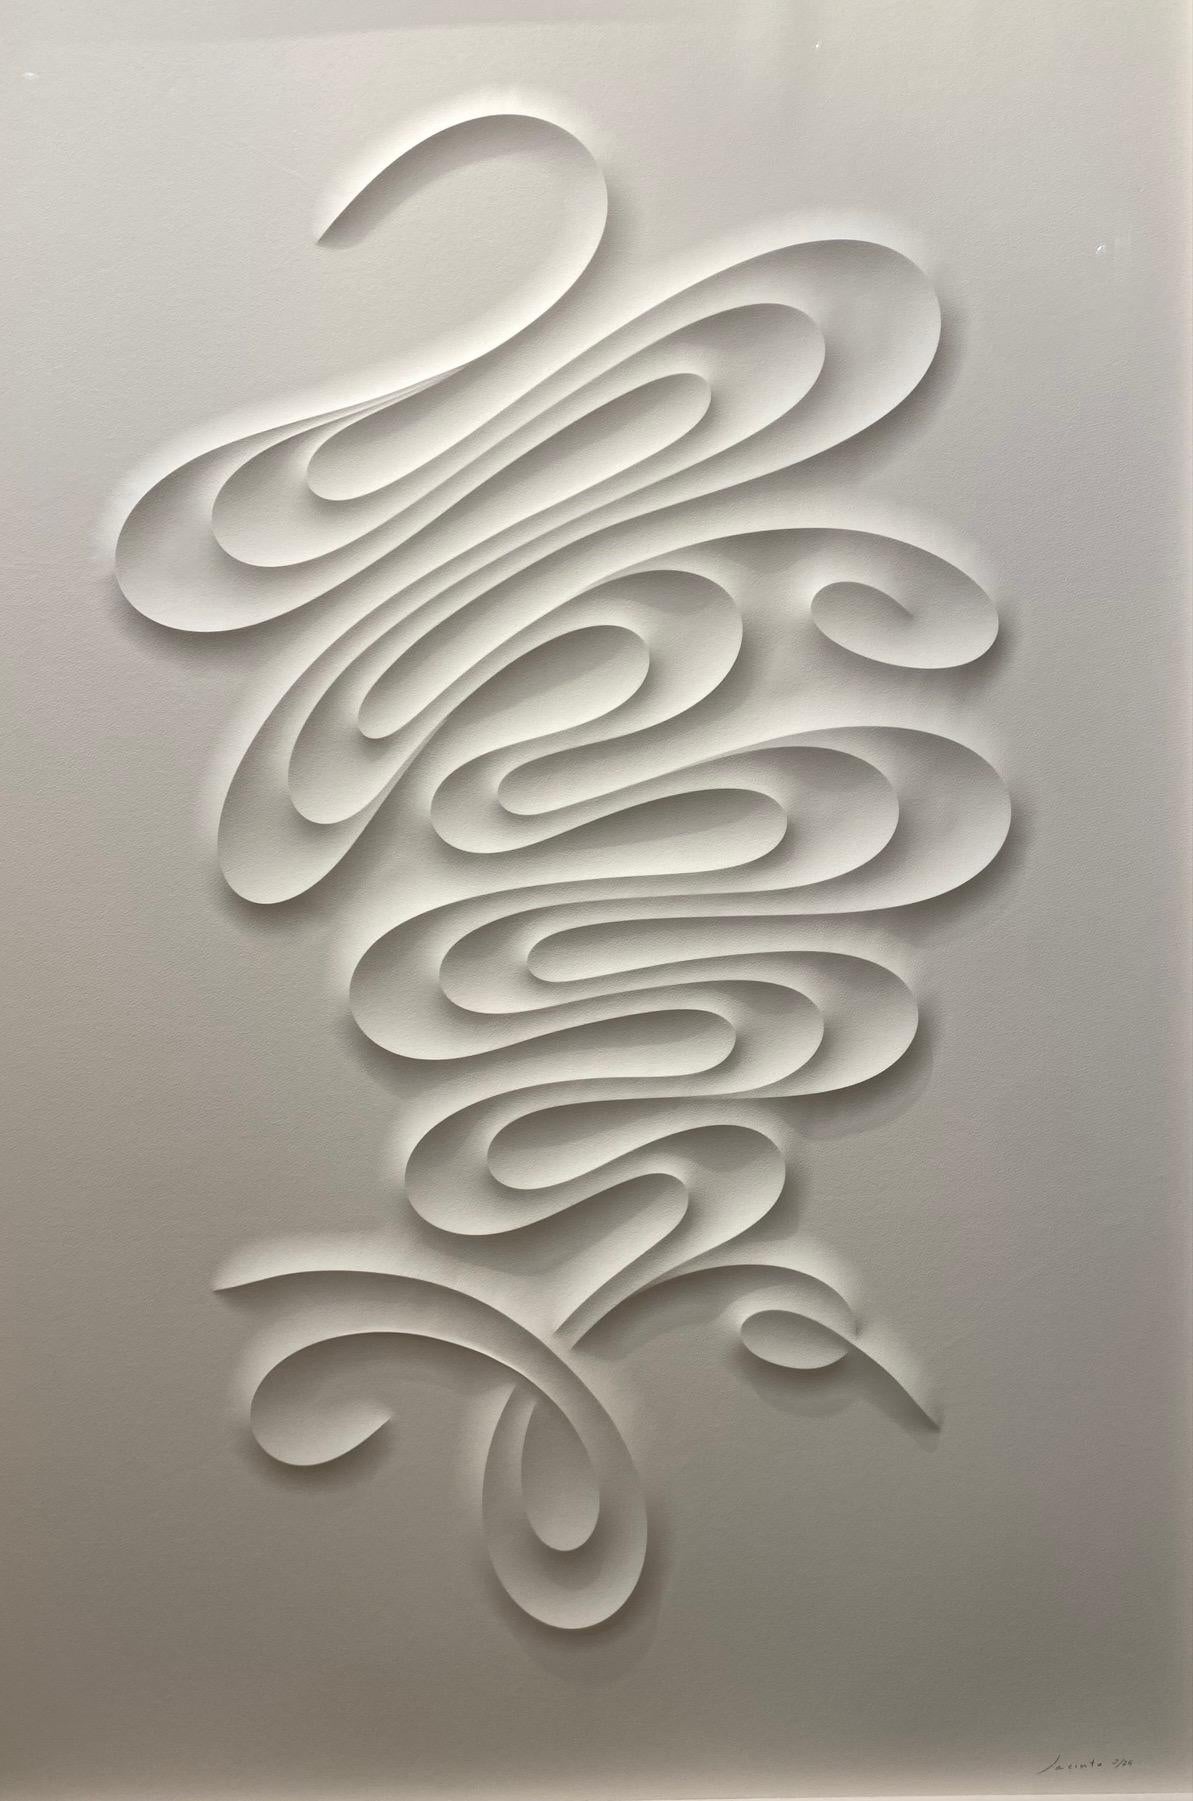 "TFEXT" is an embossed original paper work by Spanish artist Jaquinto Moros. It is a contemporary curvilinear embossed paper work with a sandy white appearance and relief effect. Edition 25, originally singed and numbered. Certificate. Comes framed